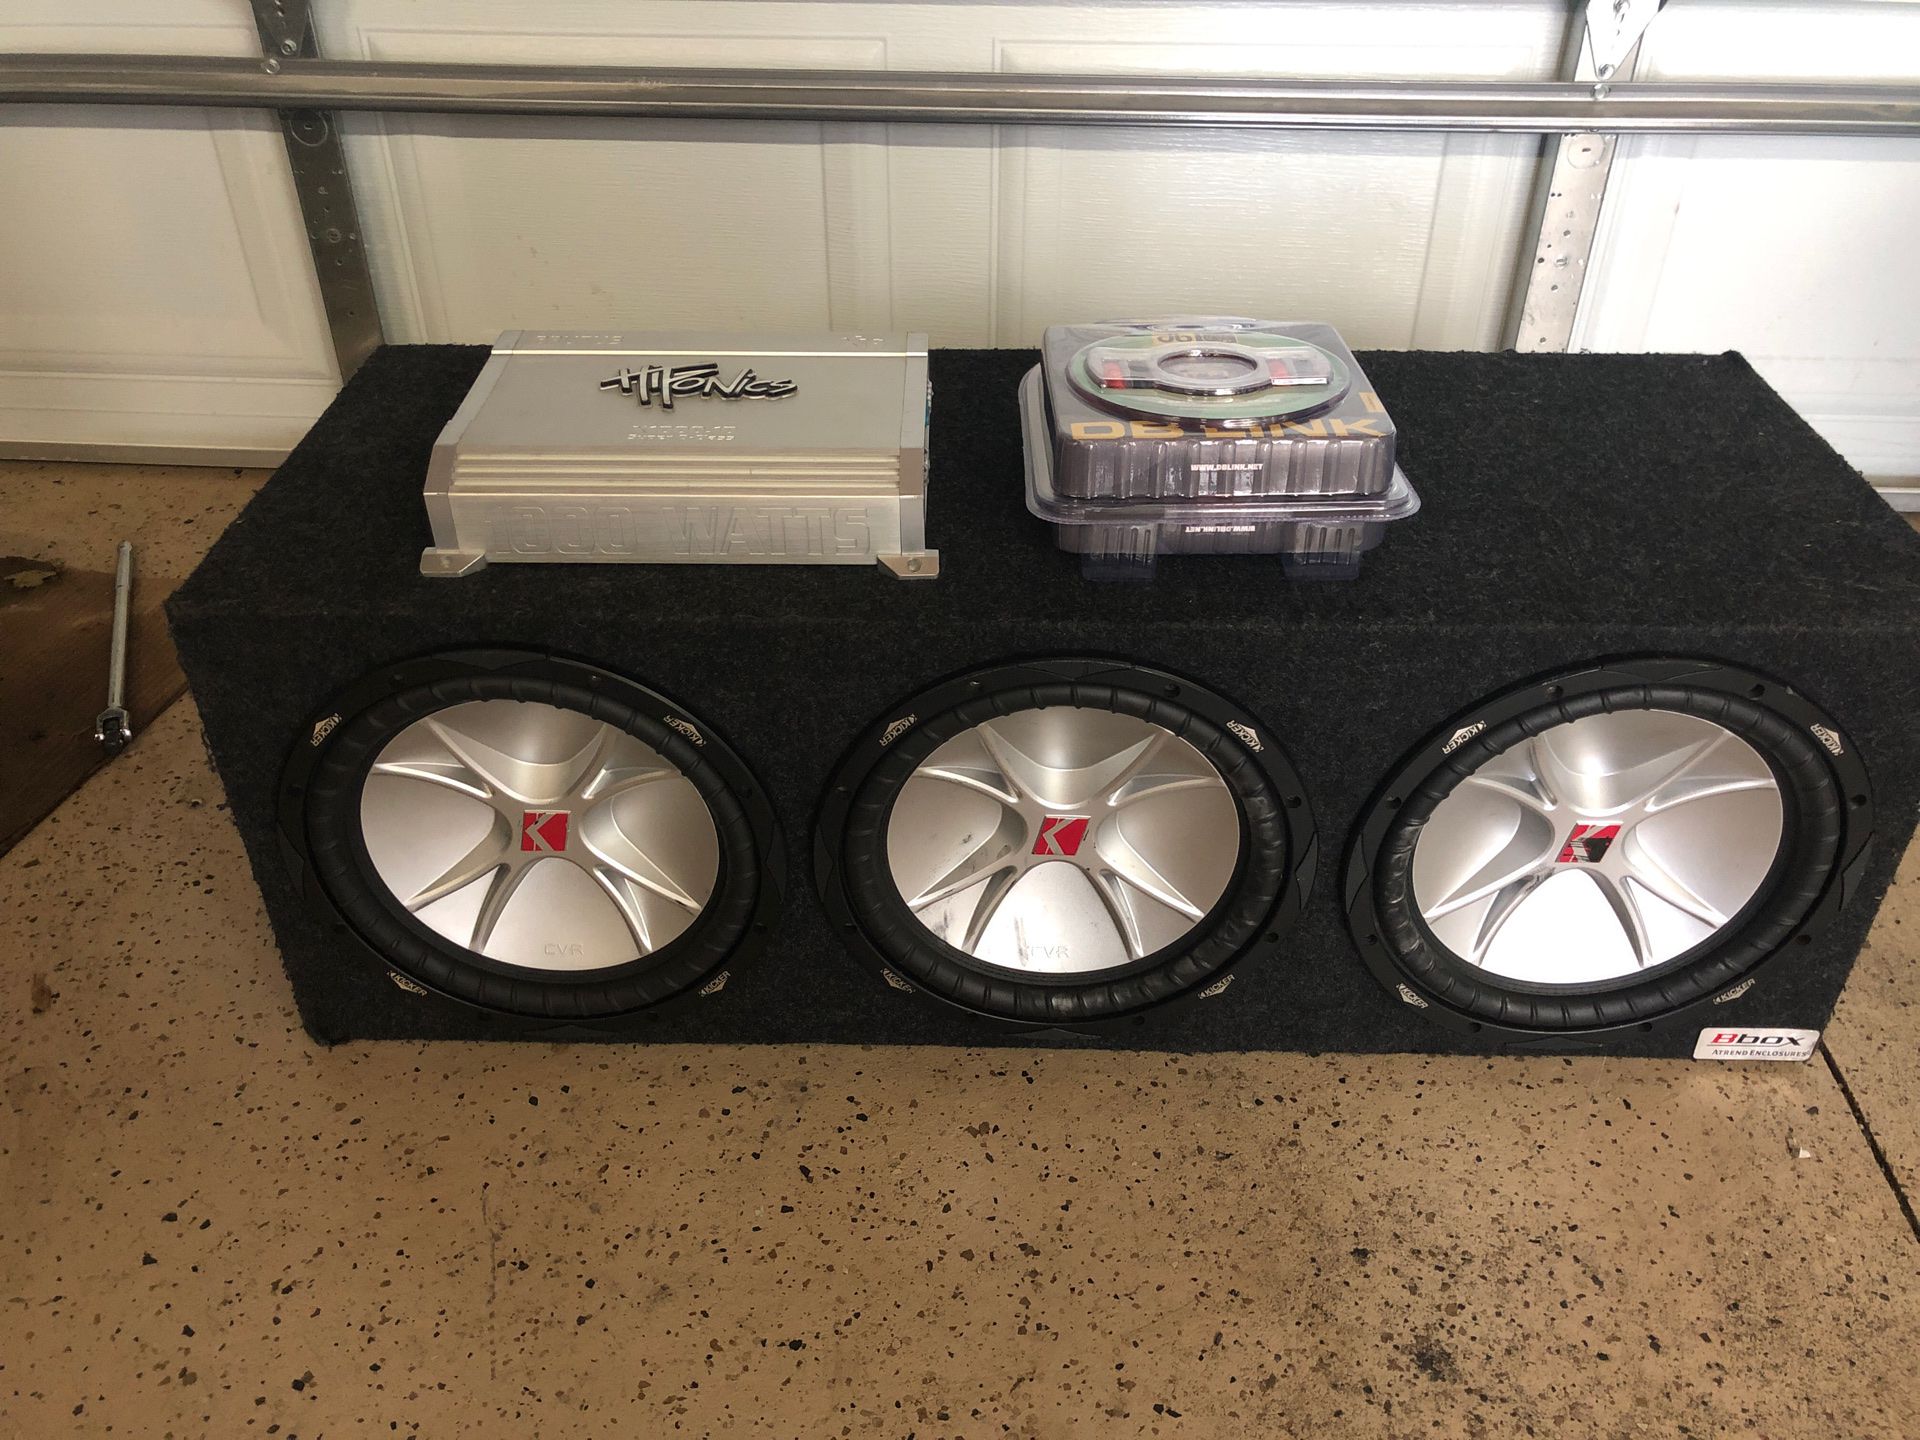 3 12 Kicker Cvrs in box with Brutus amp and wires español/English